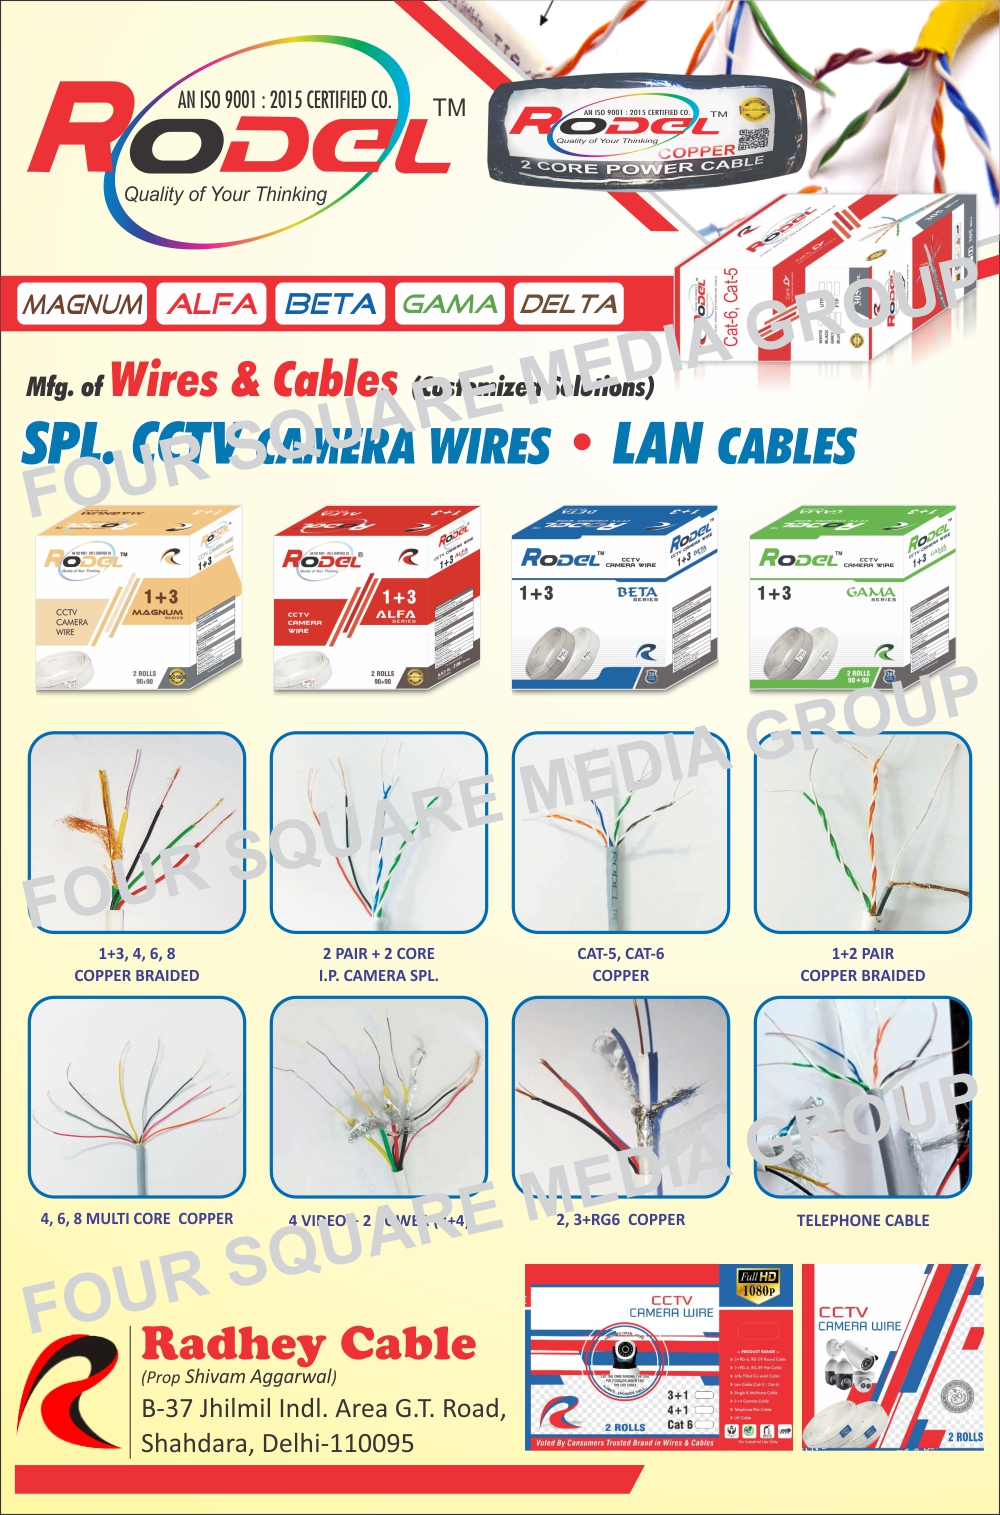 Telephone Cables,  Multicore Copper Wires, Multicore Copper Cables, Copper Braided Cables, Copper Braided Wires, CCTV Camera Wires, Lan Cables, CCTV Camera Cables, Wires, Cables